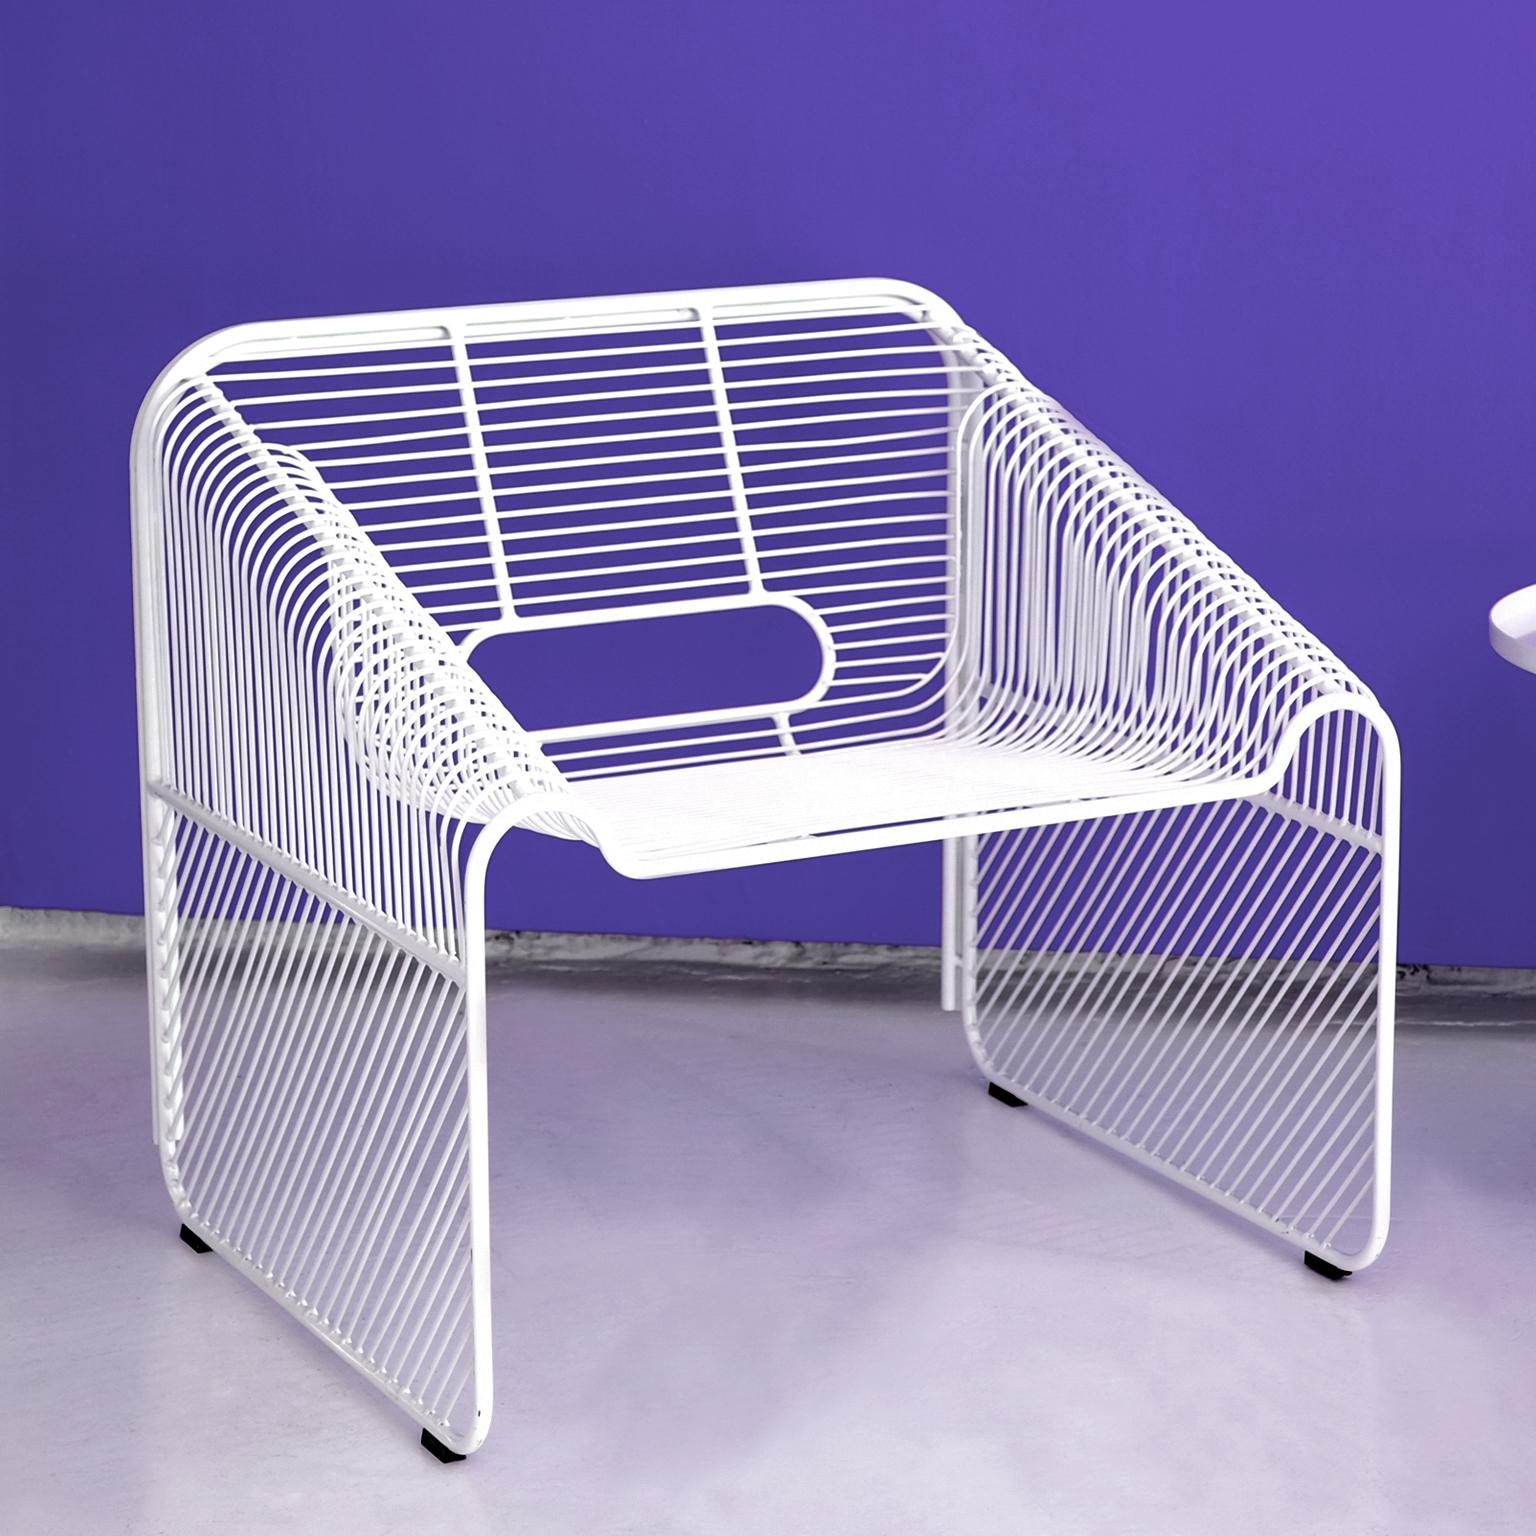 Galvanized Hot Seat, Lounge Chair, a Modern Midcentury Inspired Design, Electric Blue